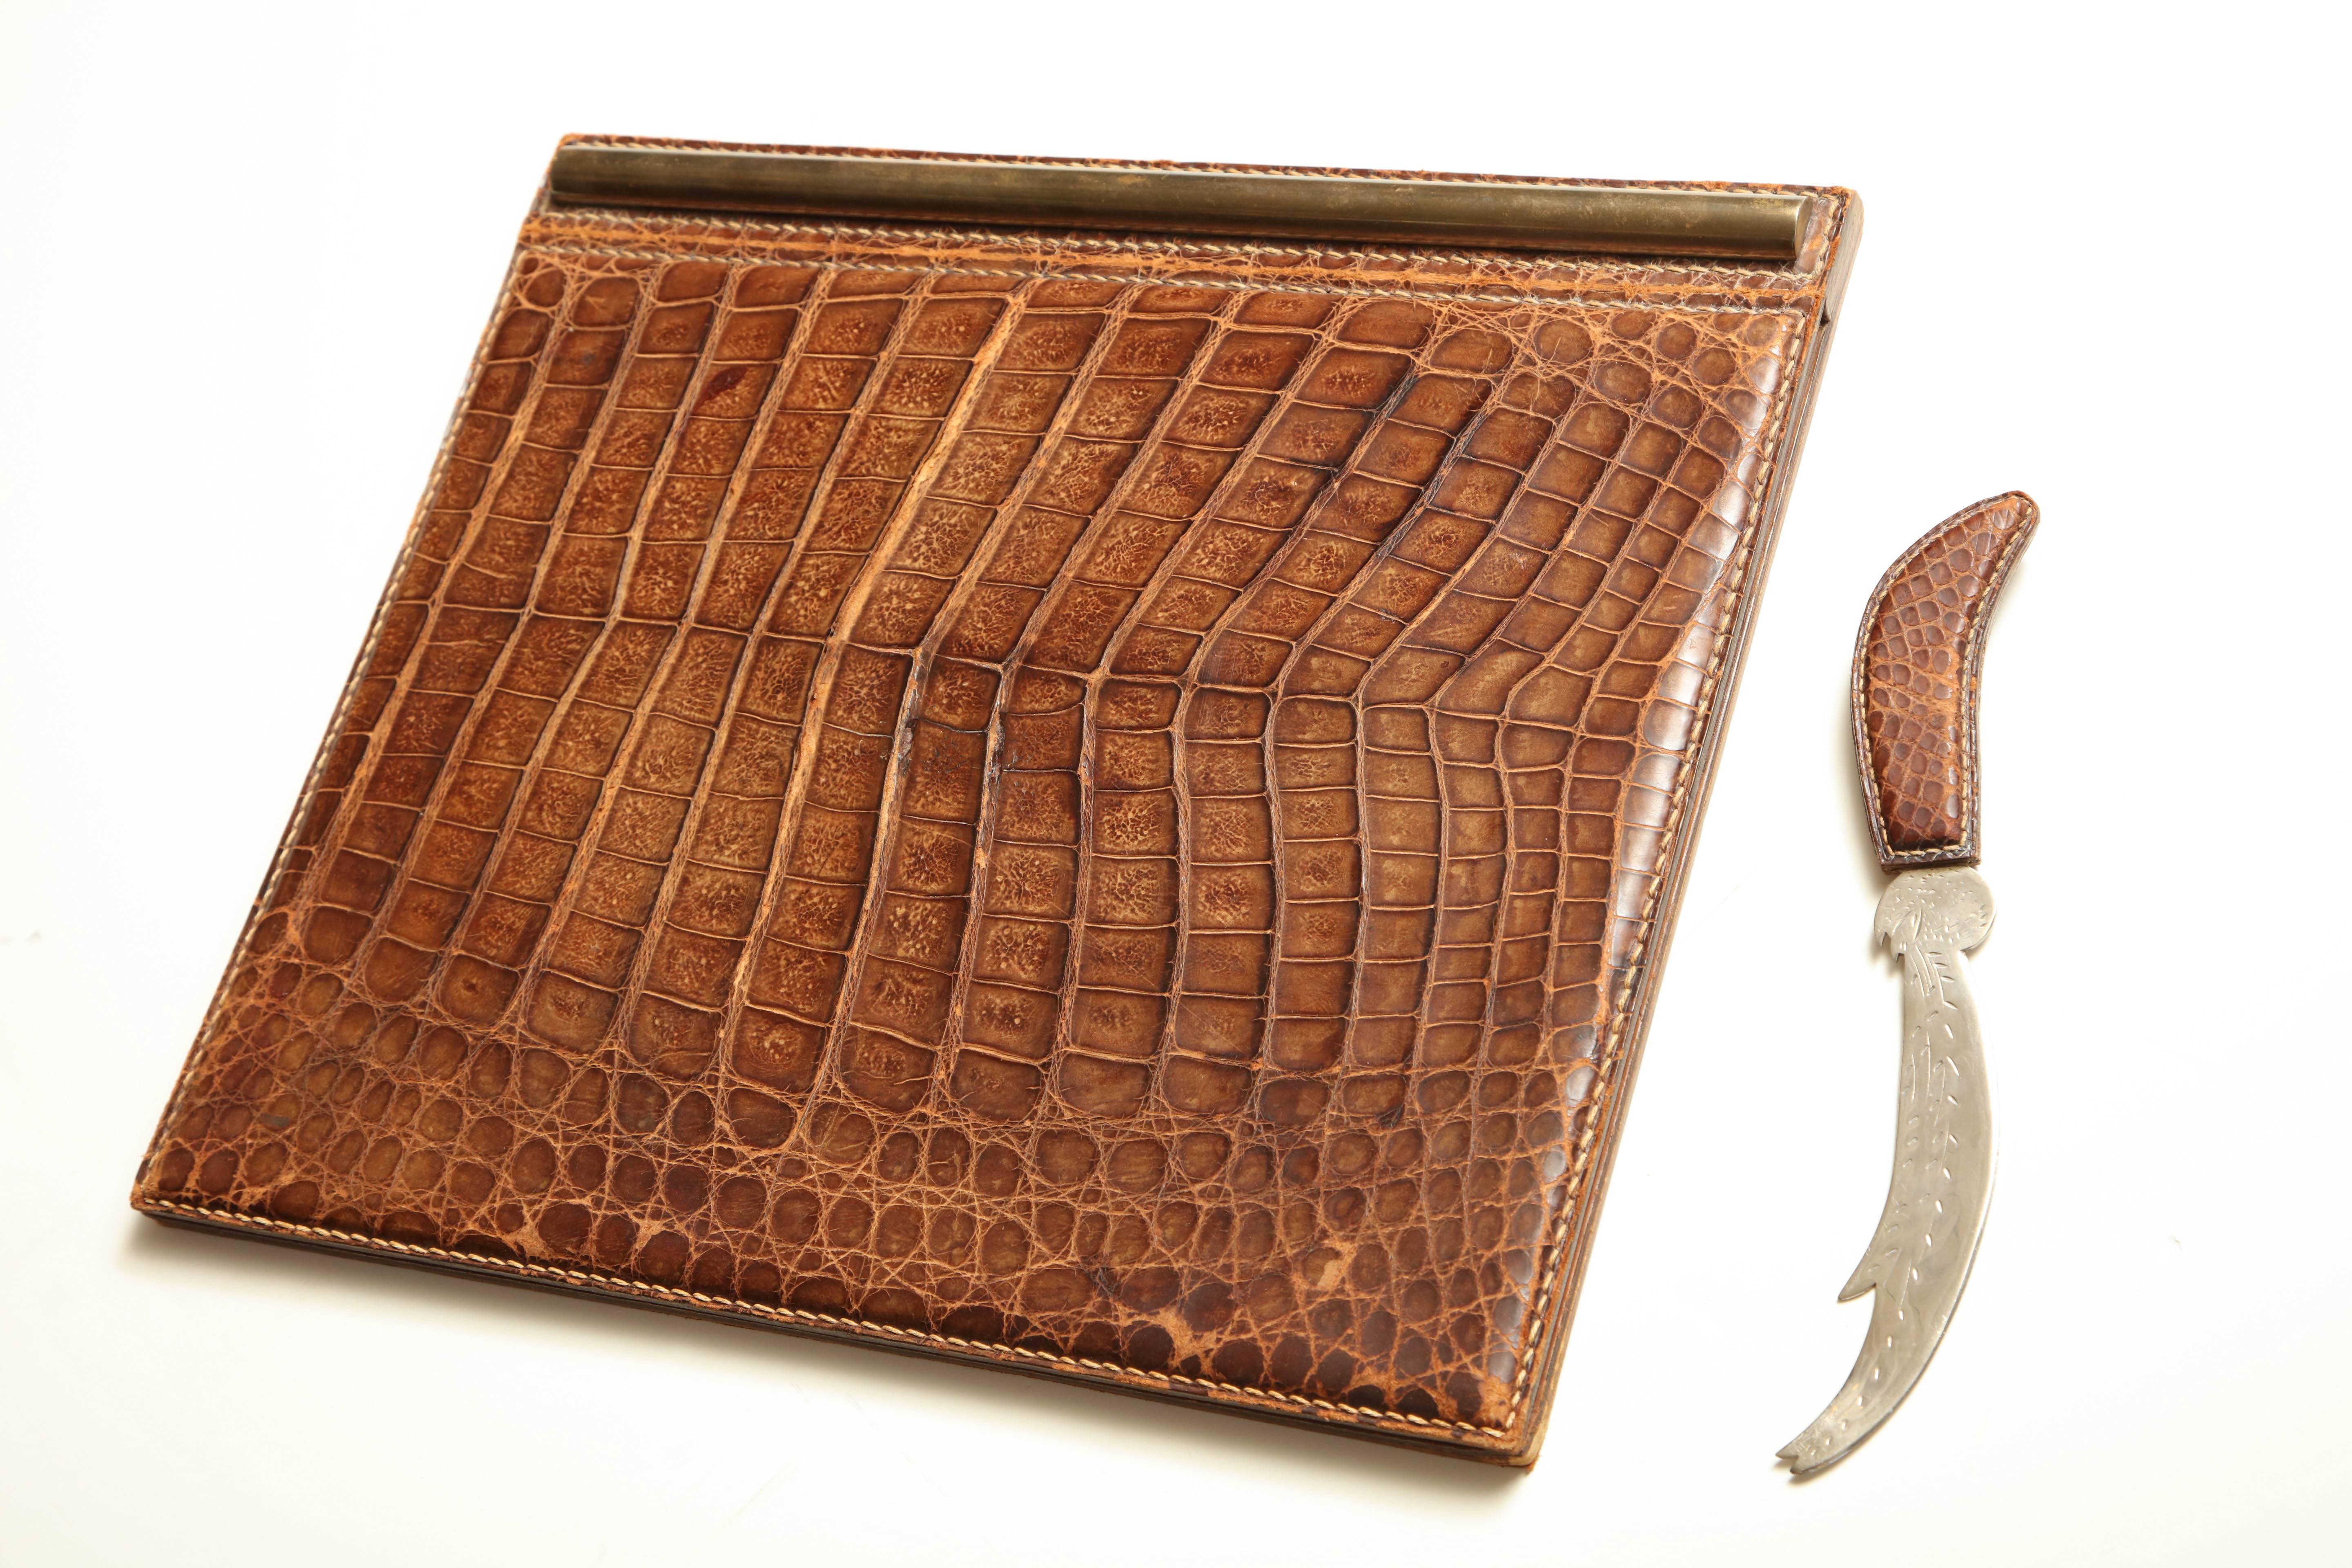 Folding desk blotter and letter opener in alligator by Mittaldi of Buenes Aires.